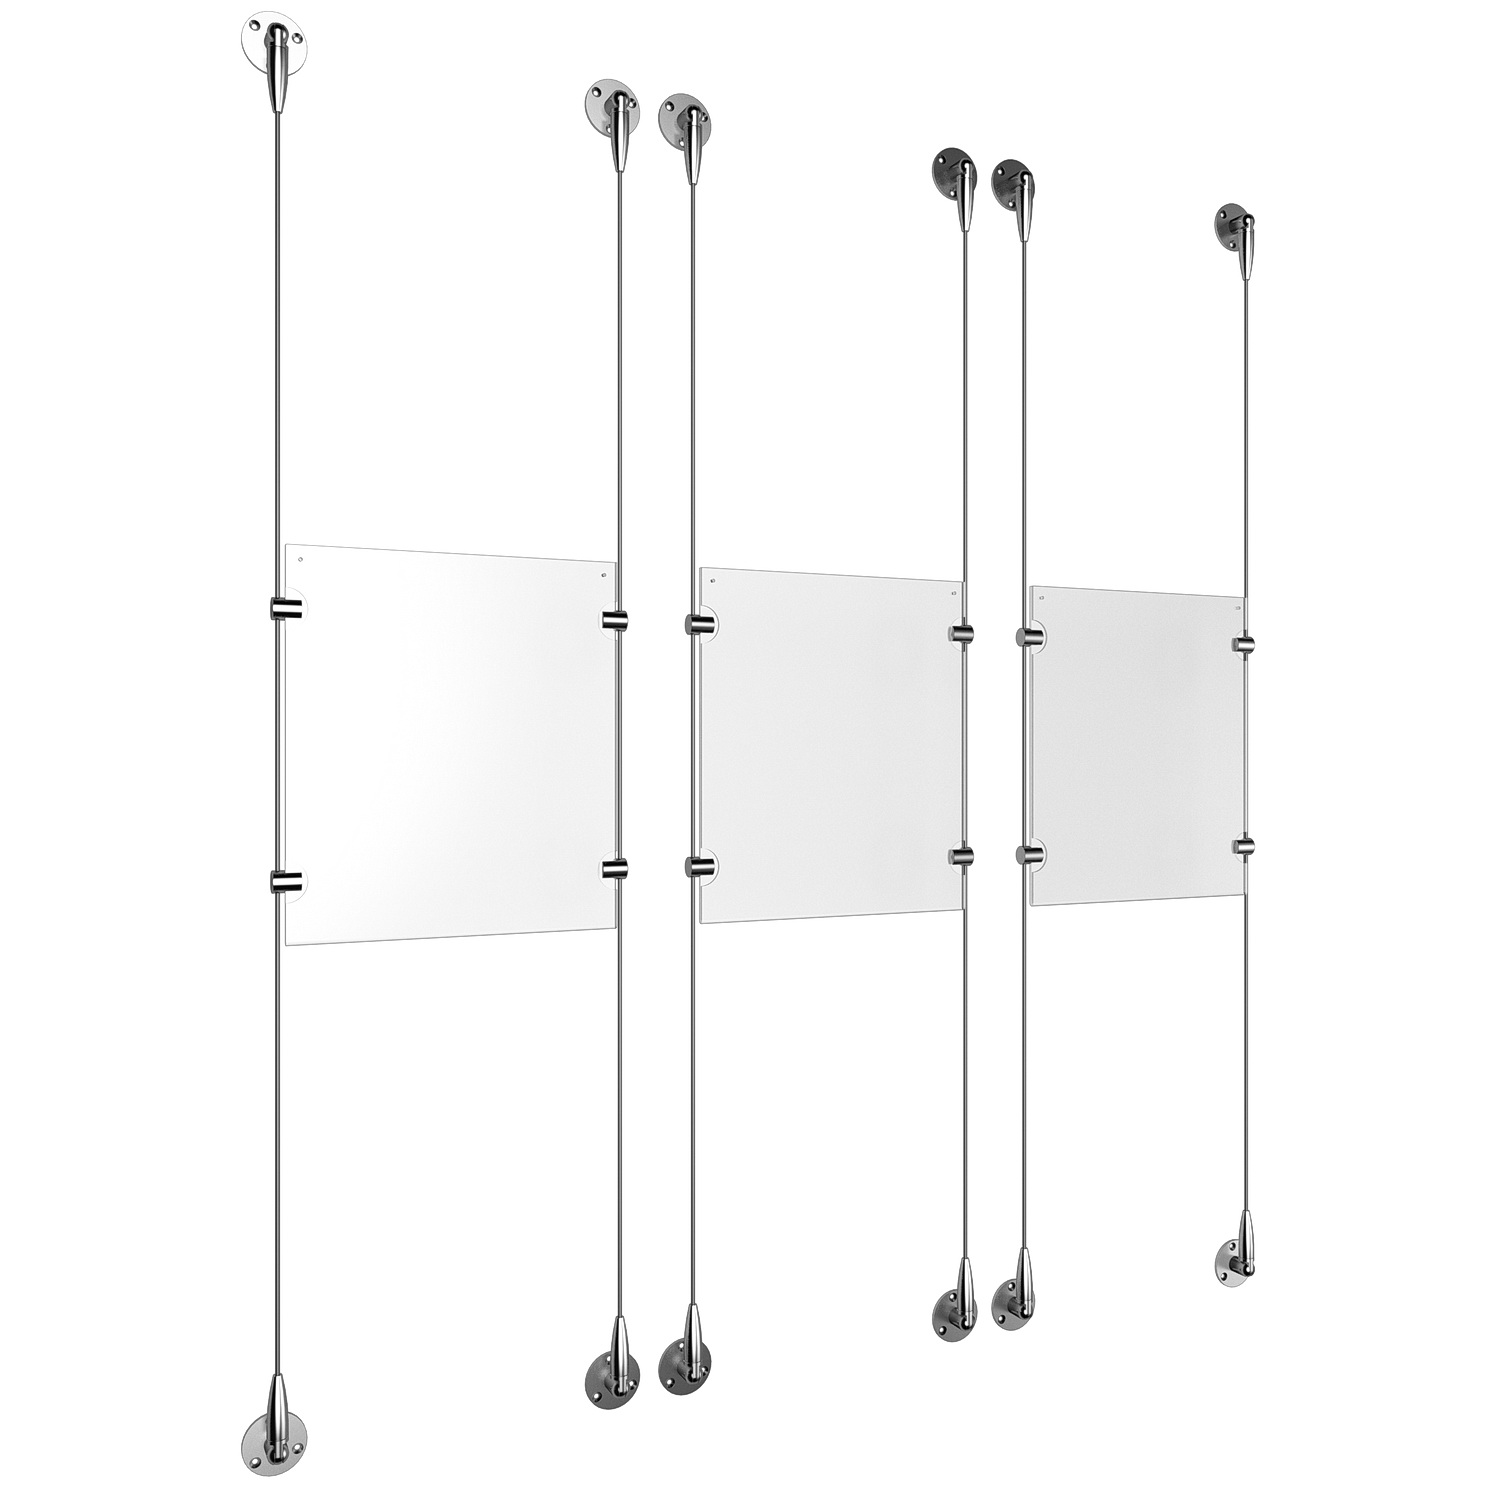 (3) 8-1/2'' Width x 11'' Height Clear Acrylic Frame & (6) Stainless Steel Satin Brushed Adjustable Angle Signature 1/8'' Cable Systems with (12) Single-Sided Panel Grippers